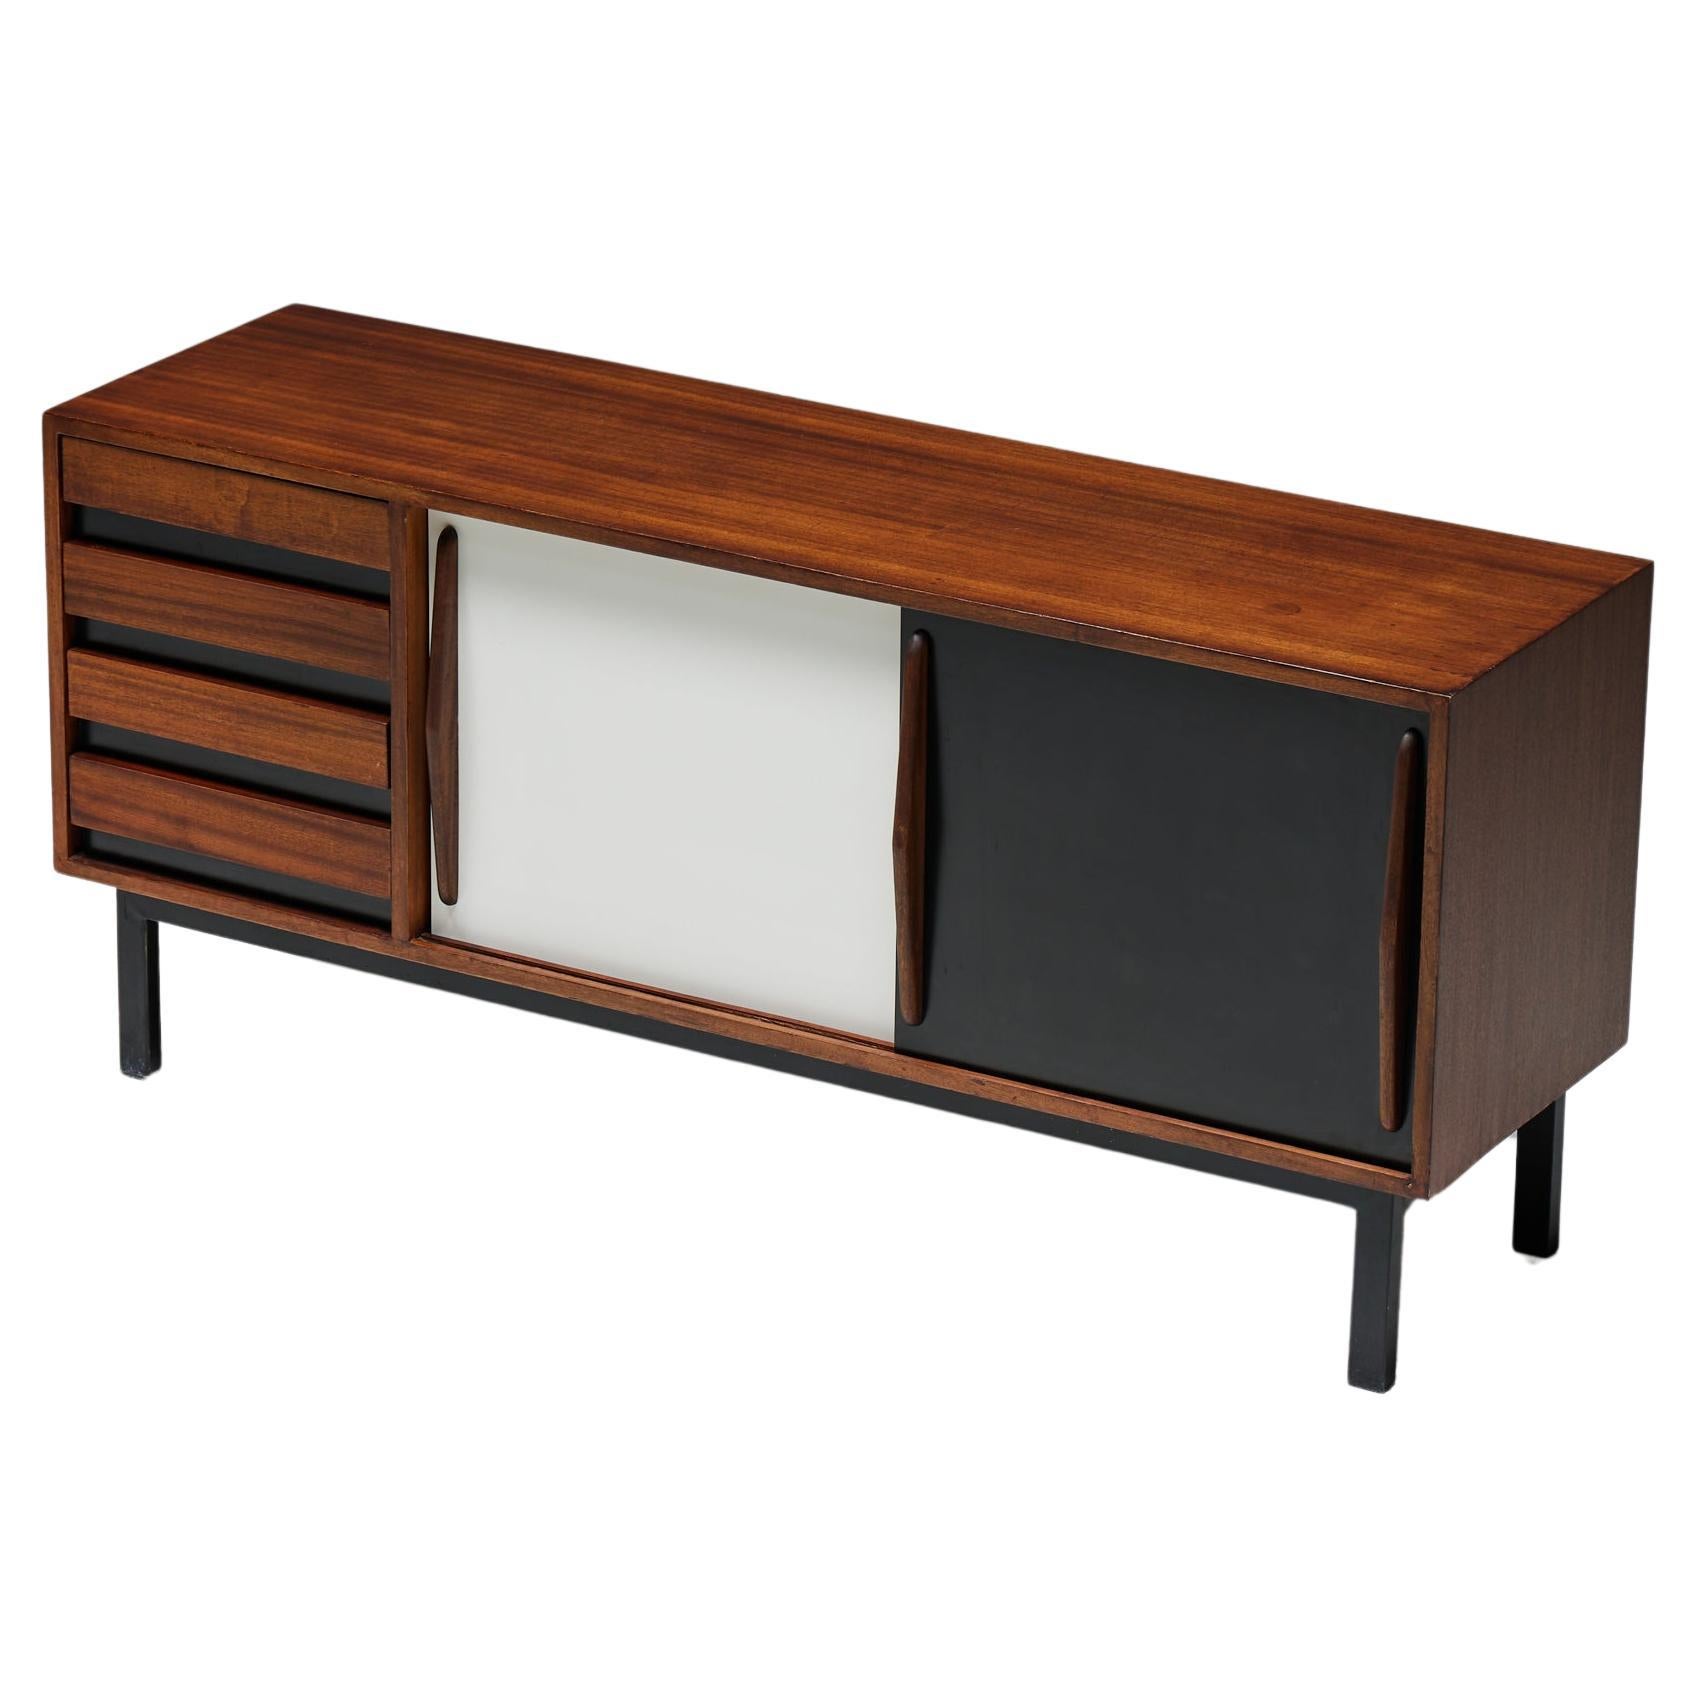 'Cansado' Sideboard by Charlotte Perriand for Steph Simon, France, 1950s For Sale